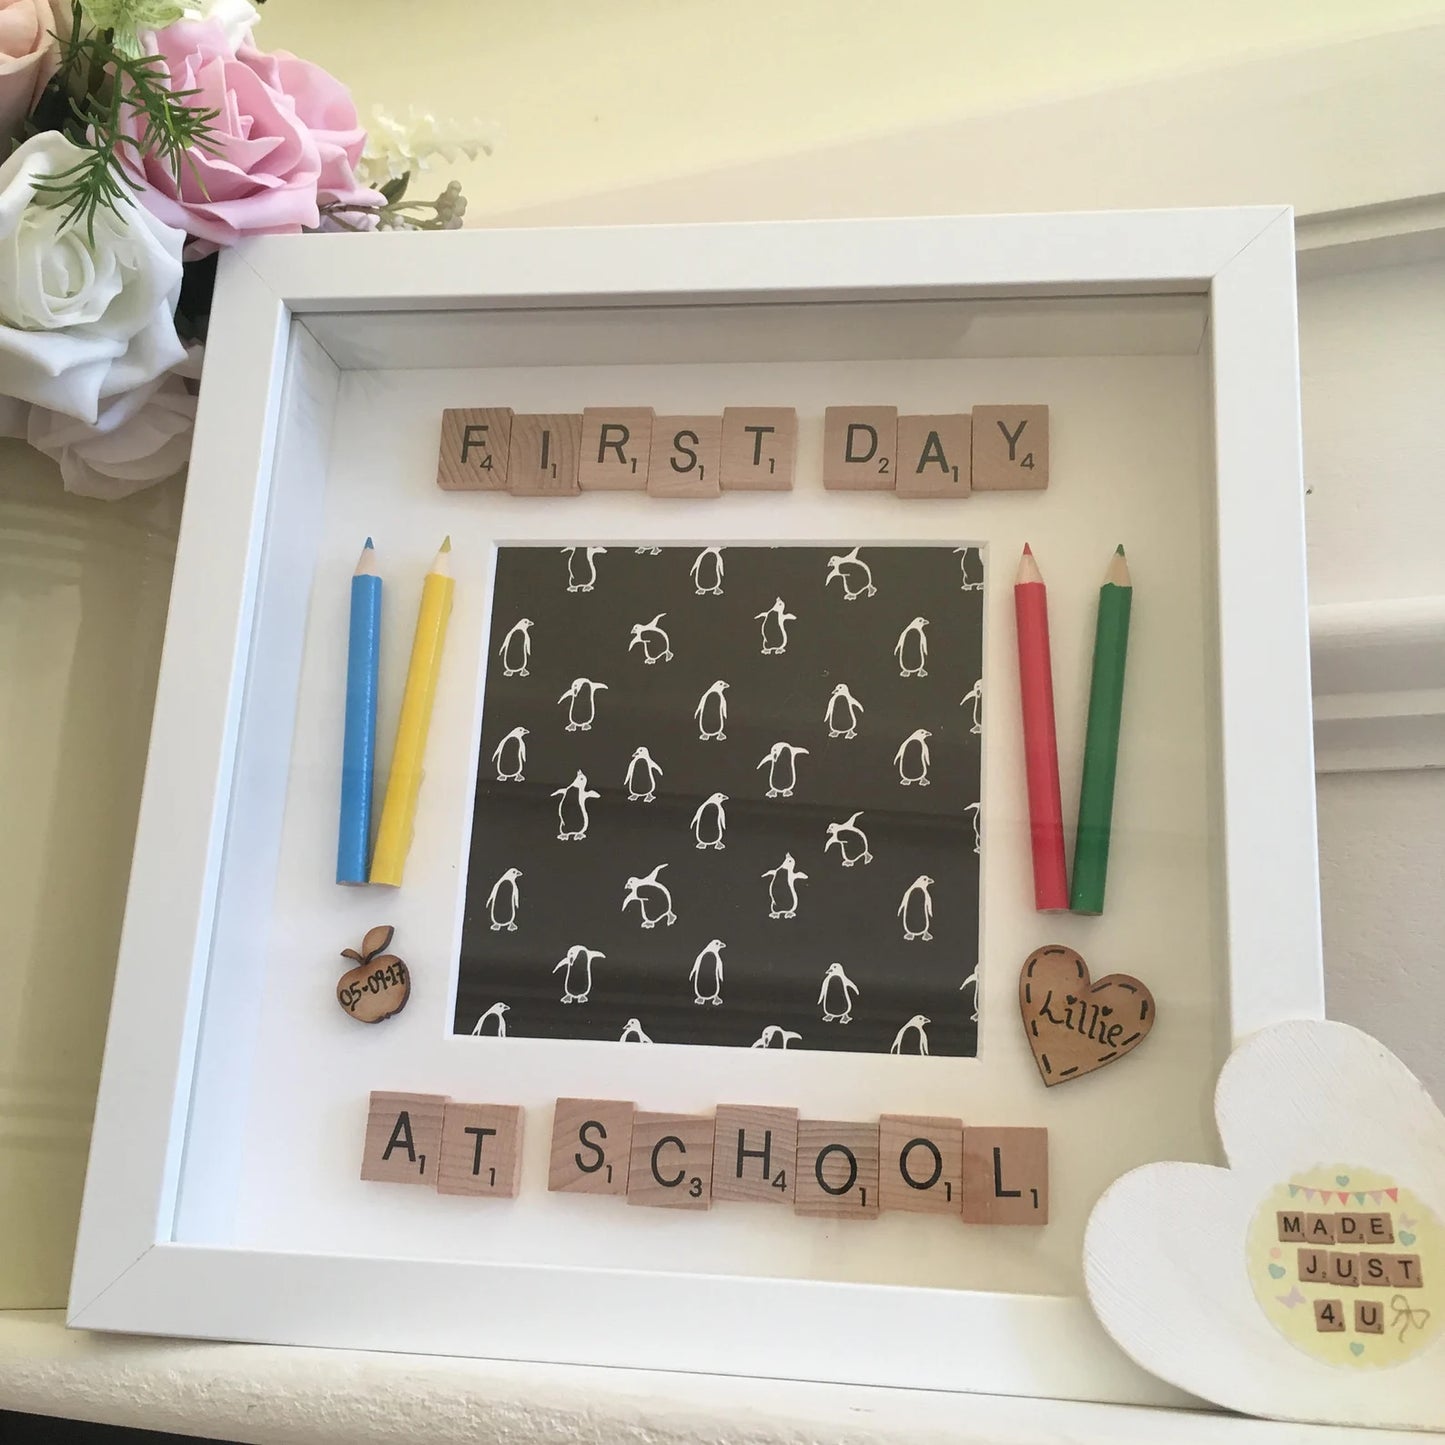 First day at school gift / Starting school or Pre school memory frame